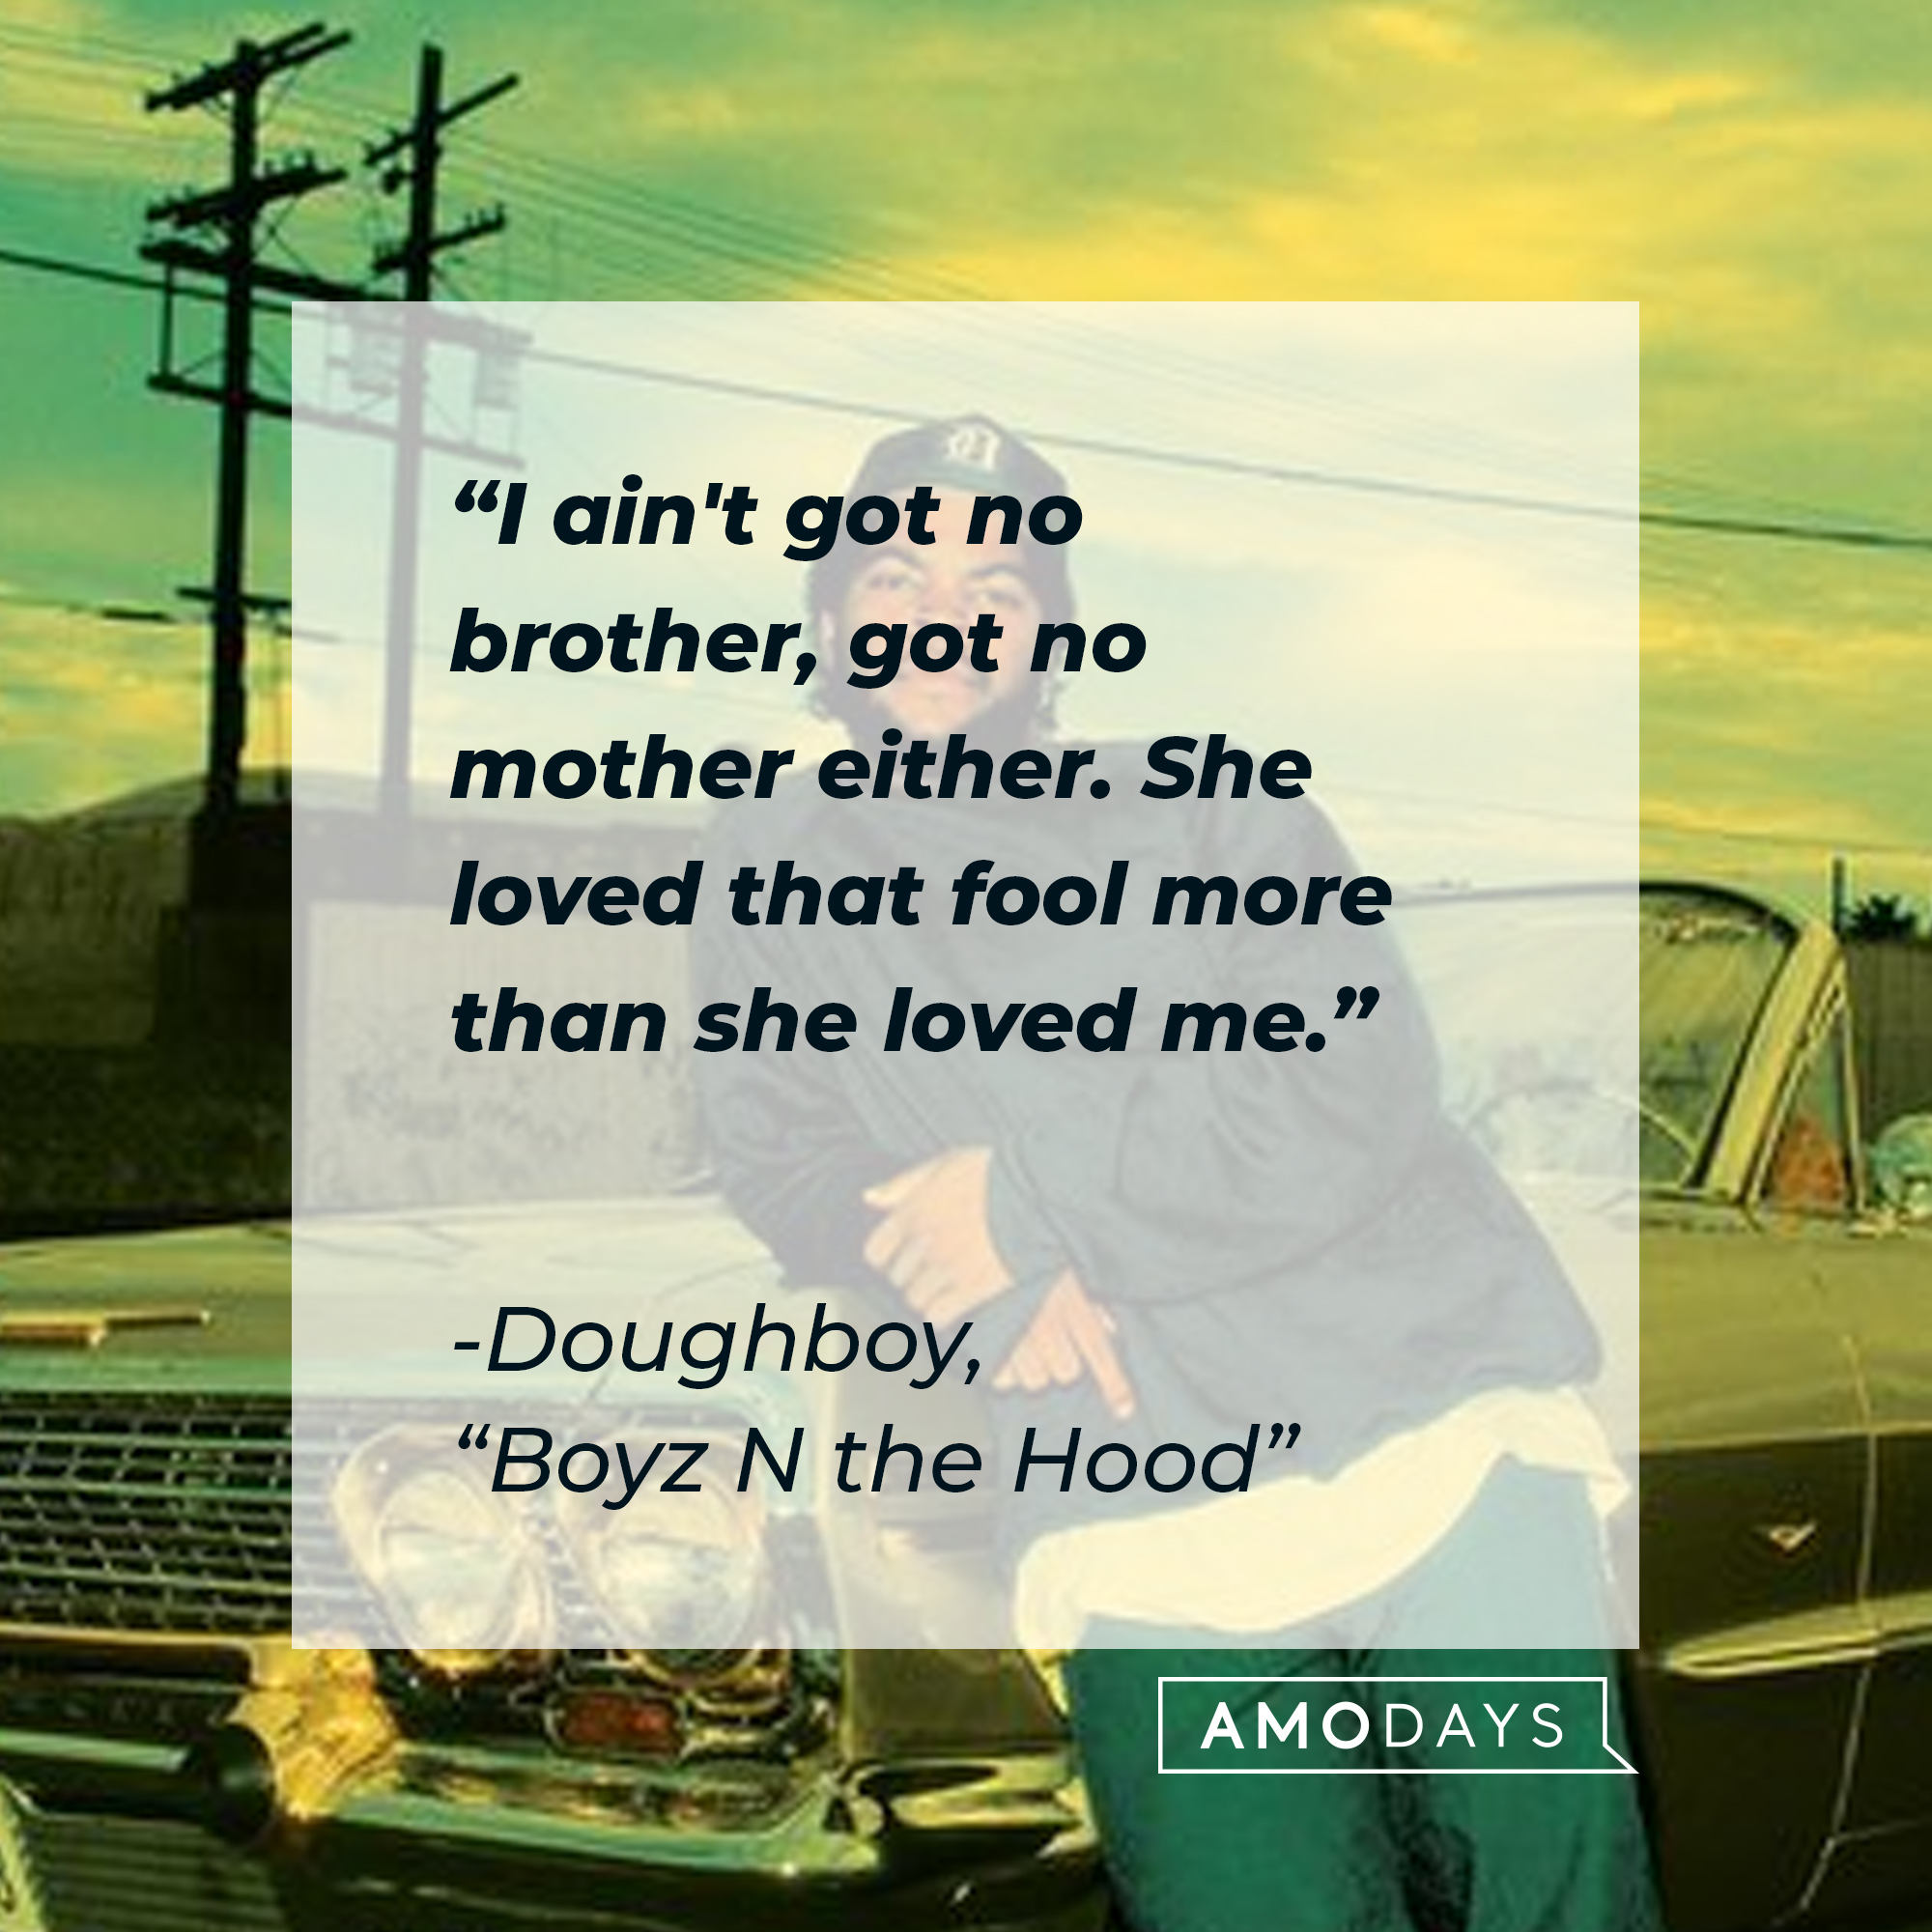 Doughboy's quote in "Boyz N the Hood:" "I ain't got no brother, got no mother either. She loved that fool more than she loved me."  | Source: Facebook.com/BoyzNtheHood